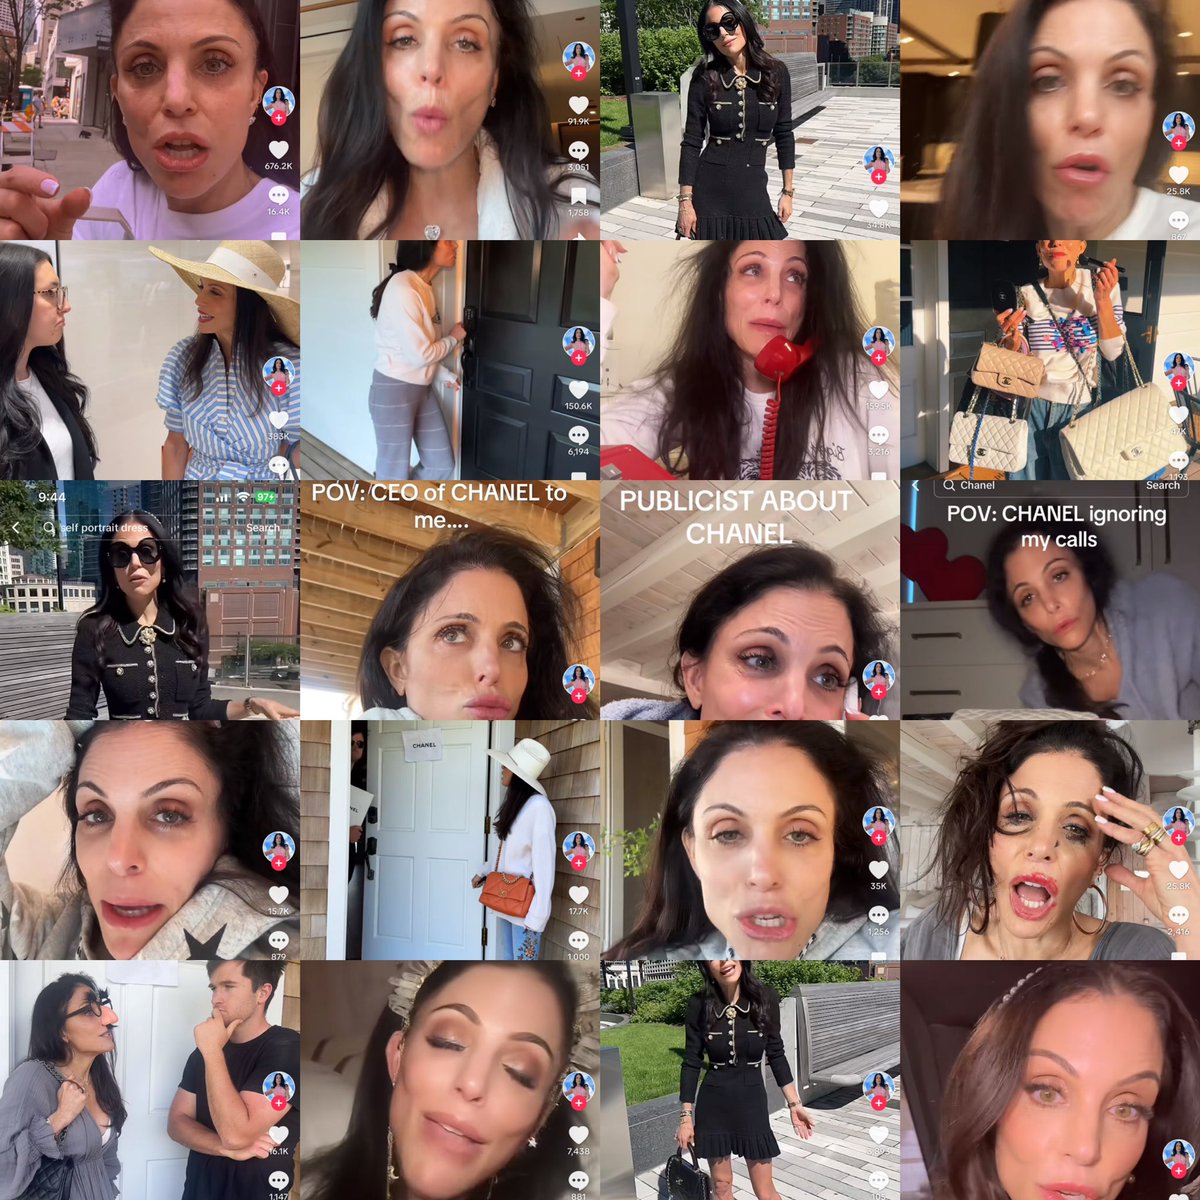 Bethenny is at TWENTY TikTok's because Chanel hurt her ego. I'm so confused what she wants out of this; exposing a luxury brand as elitist? Groundbreaking. How mortifying.